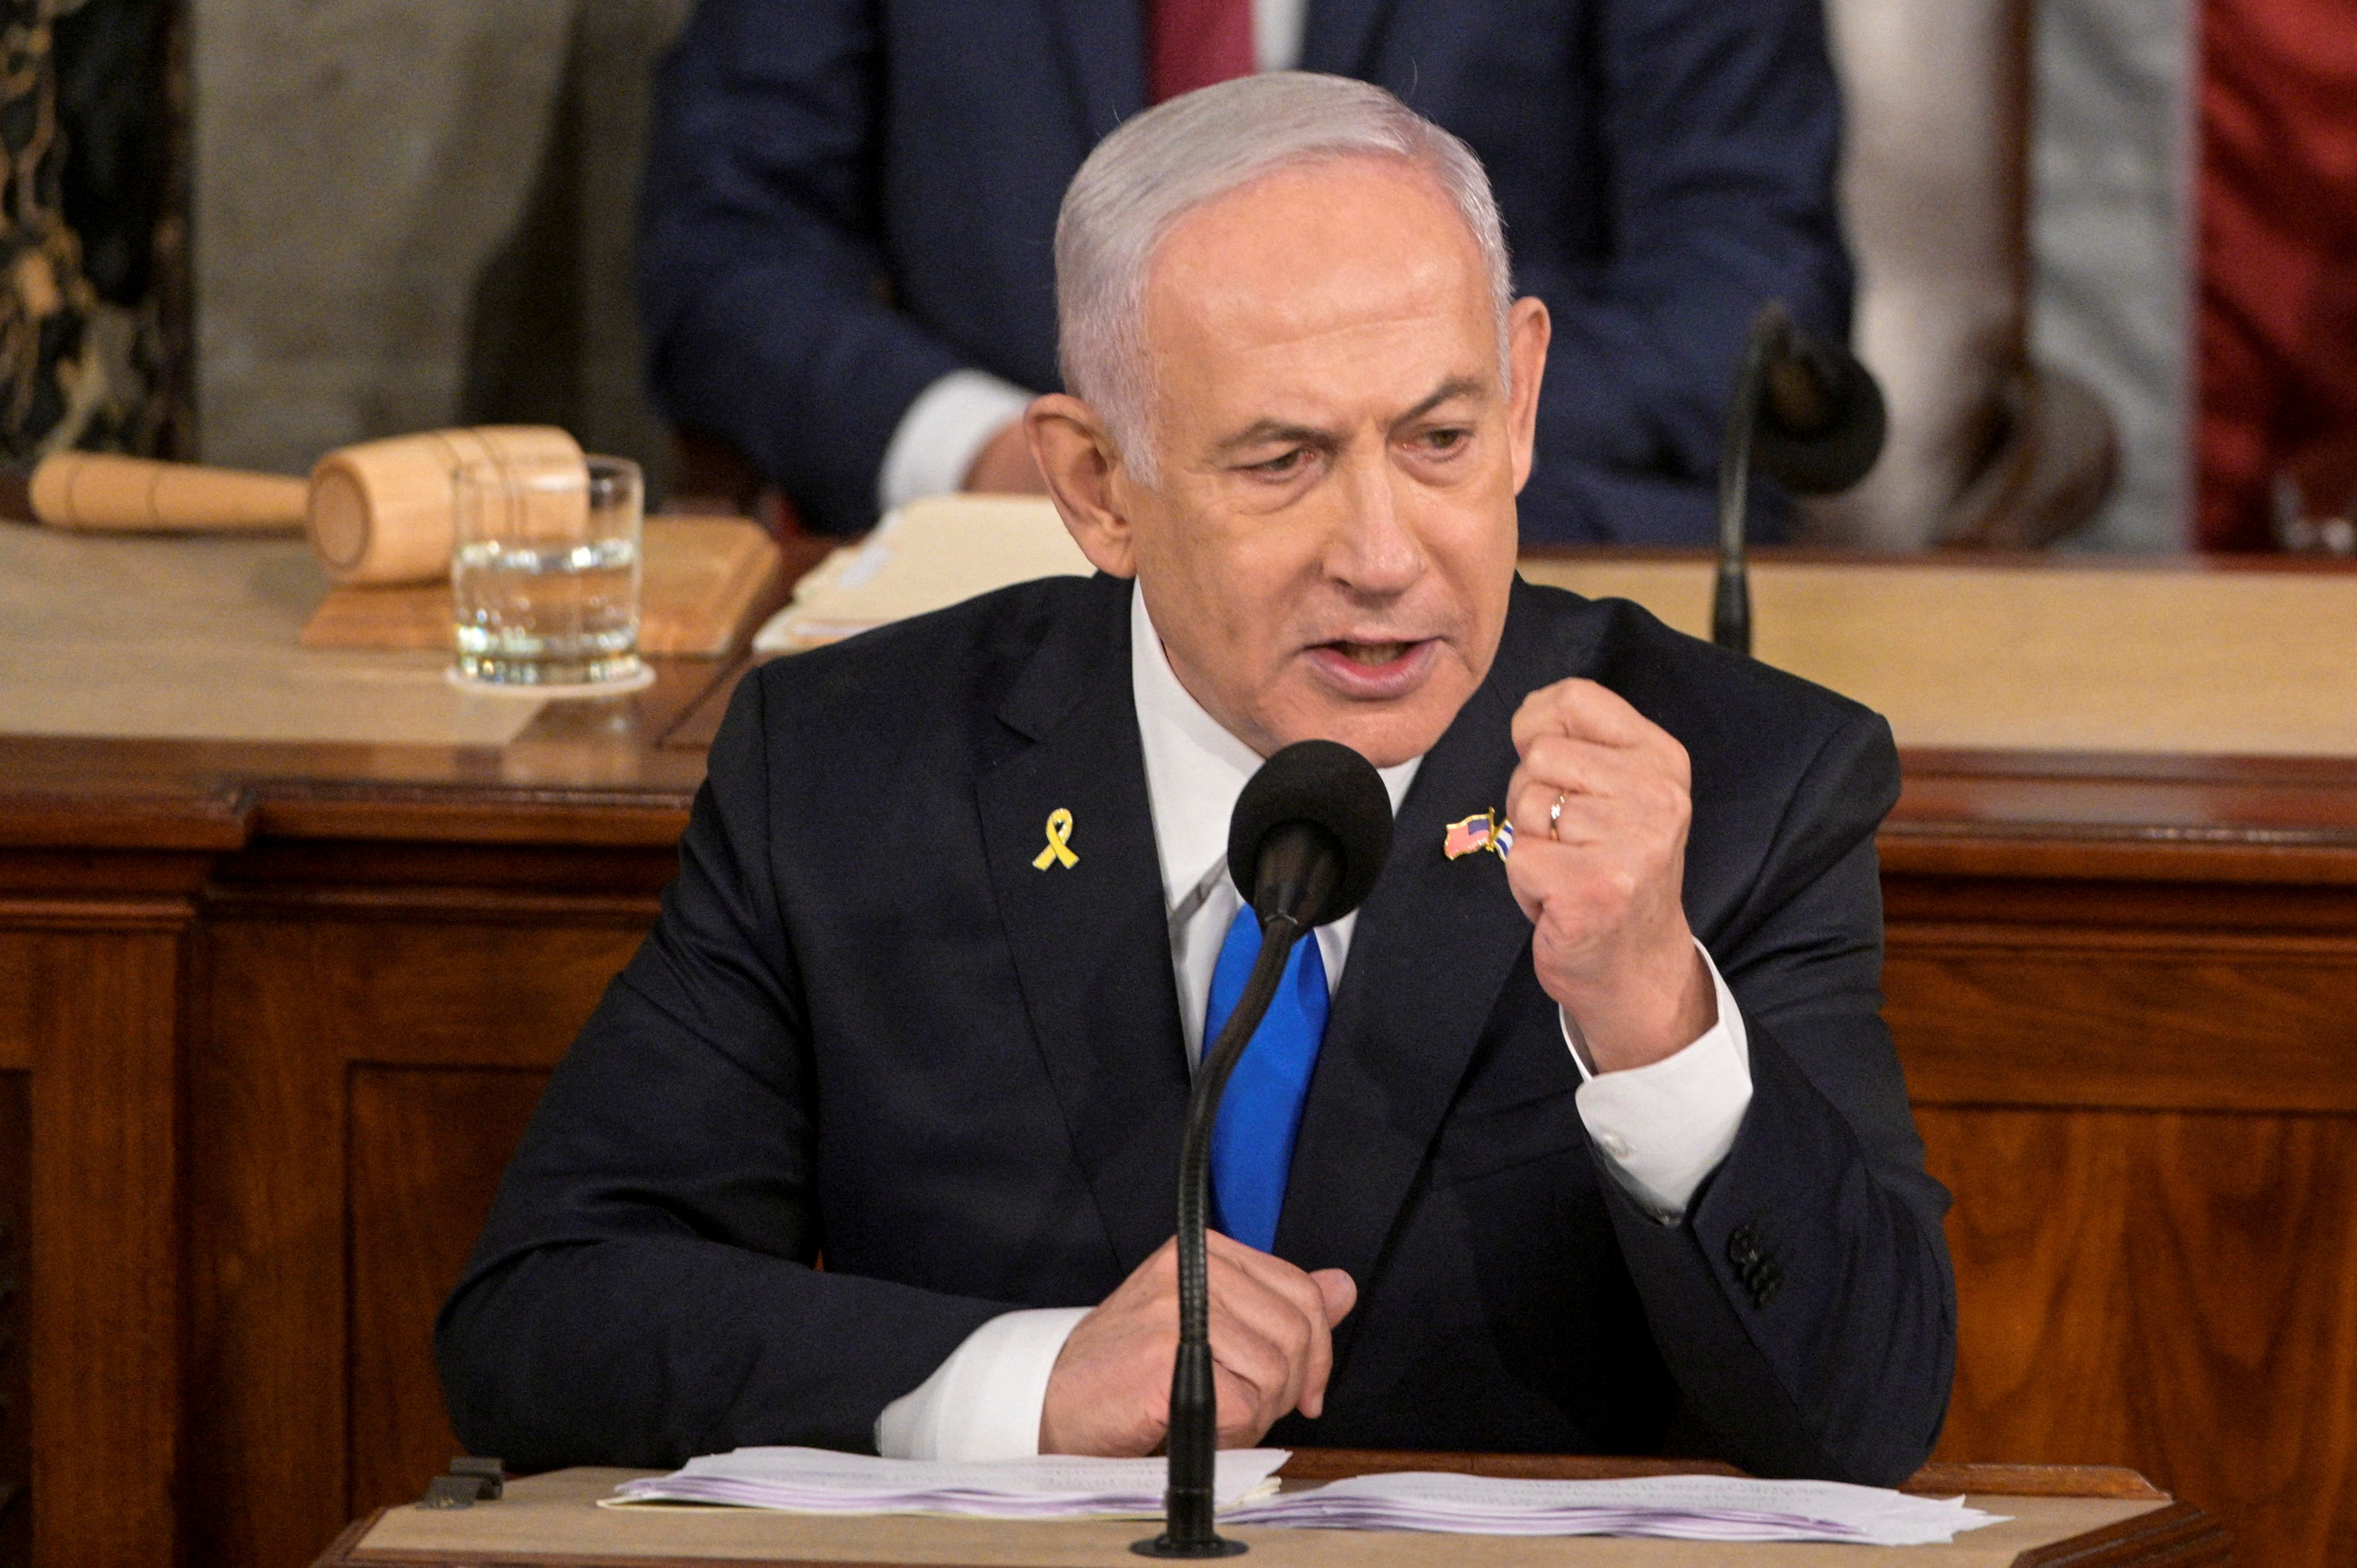 Netanyahu speaks to Congress amid protests